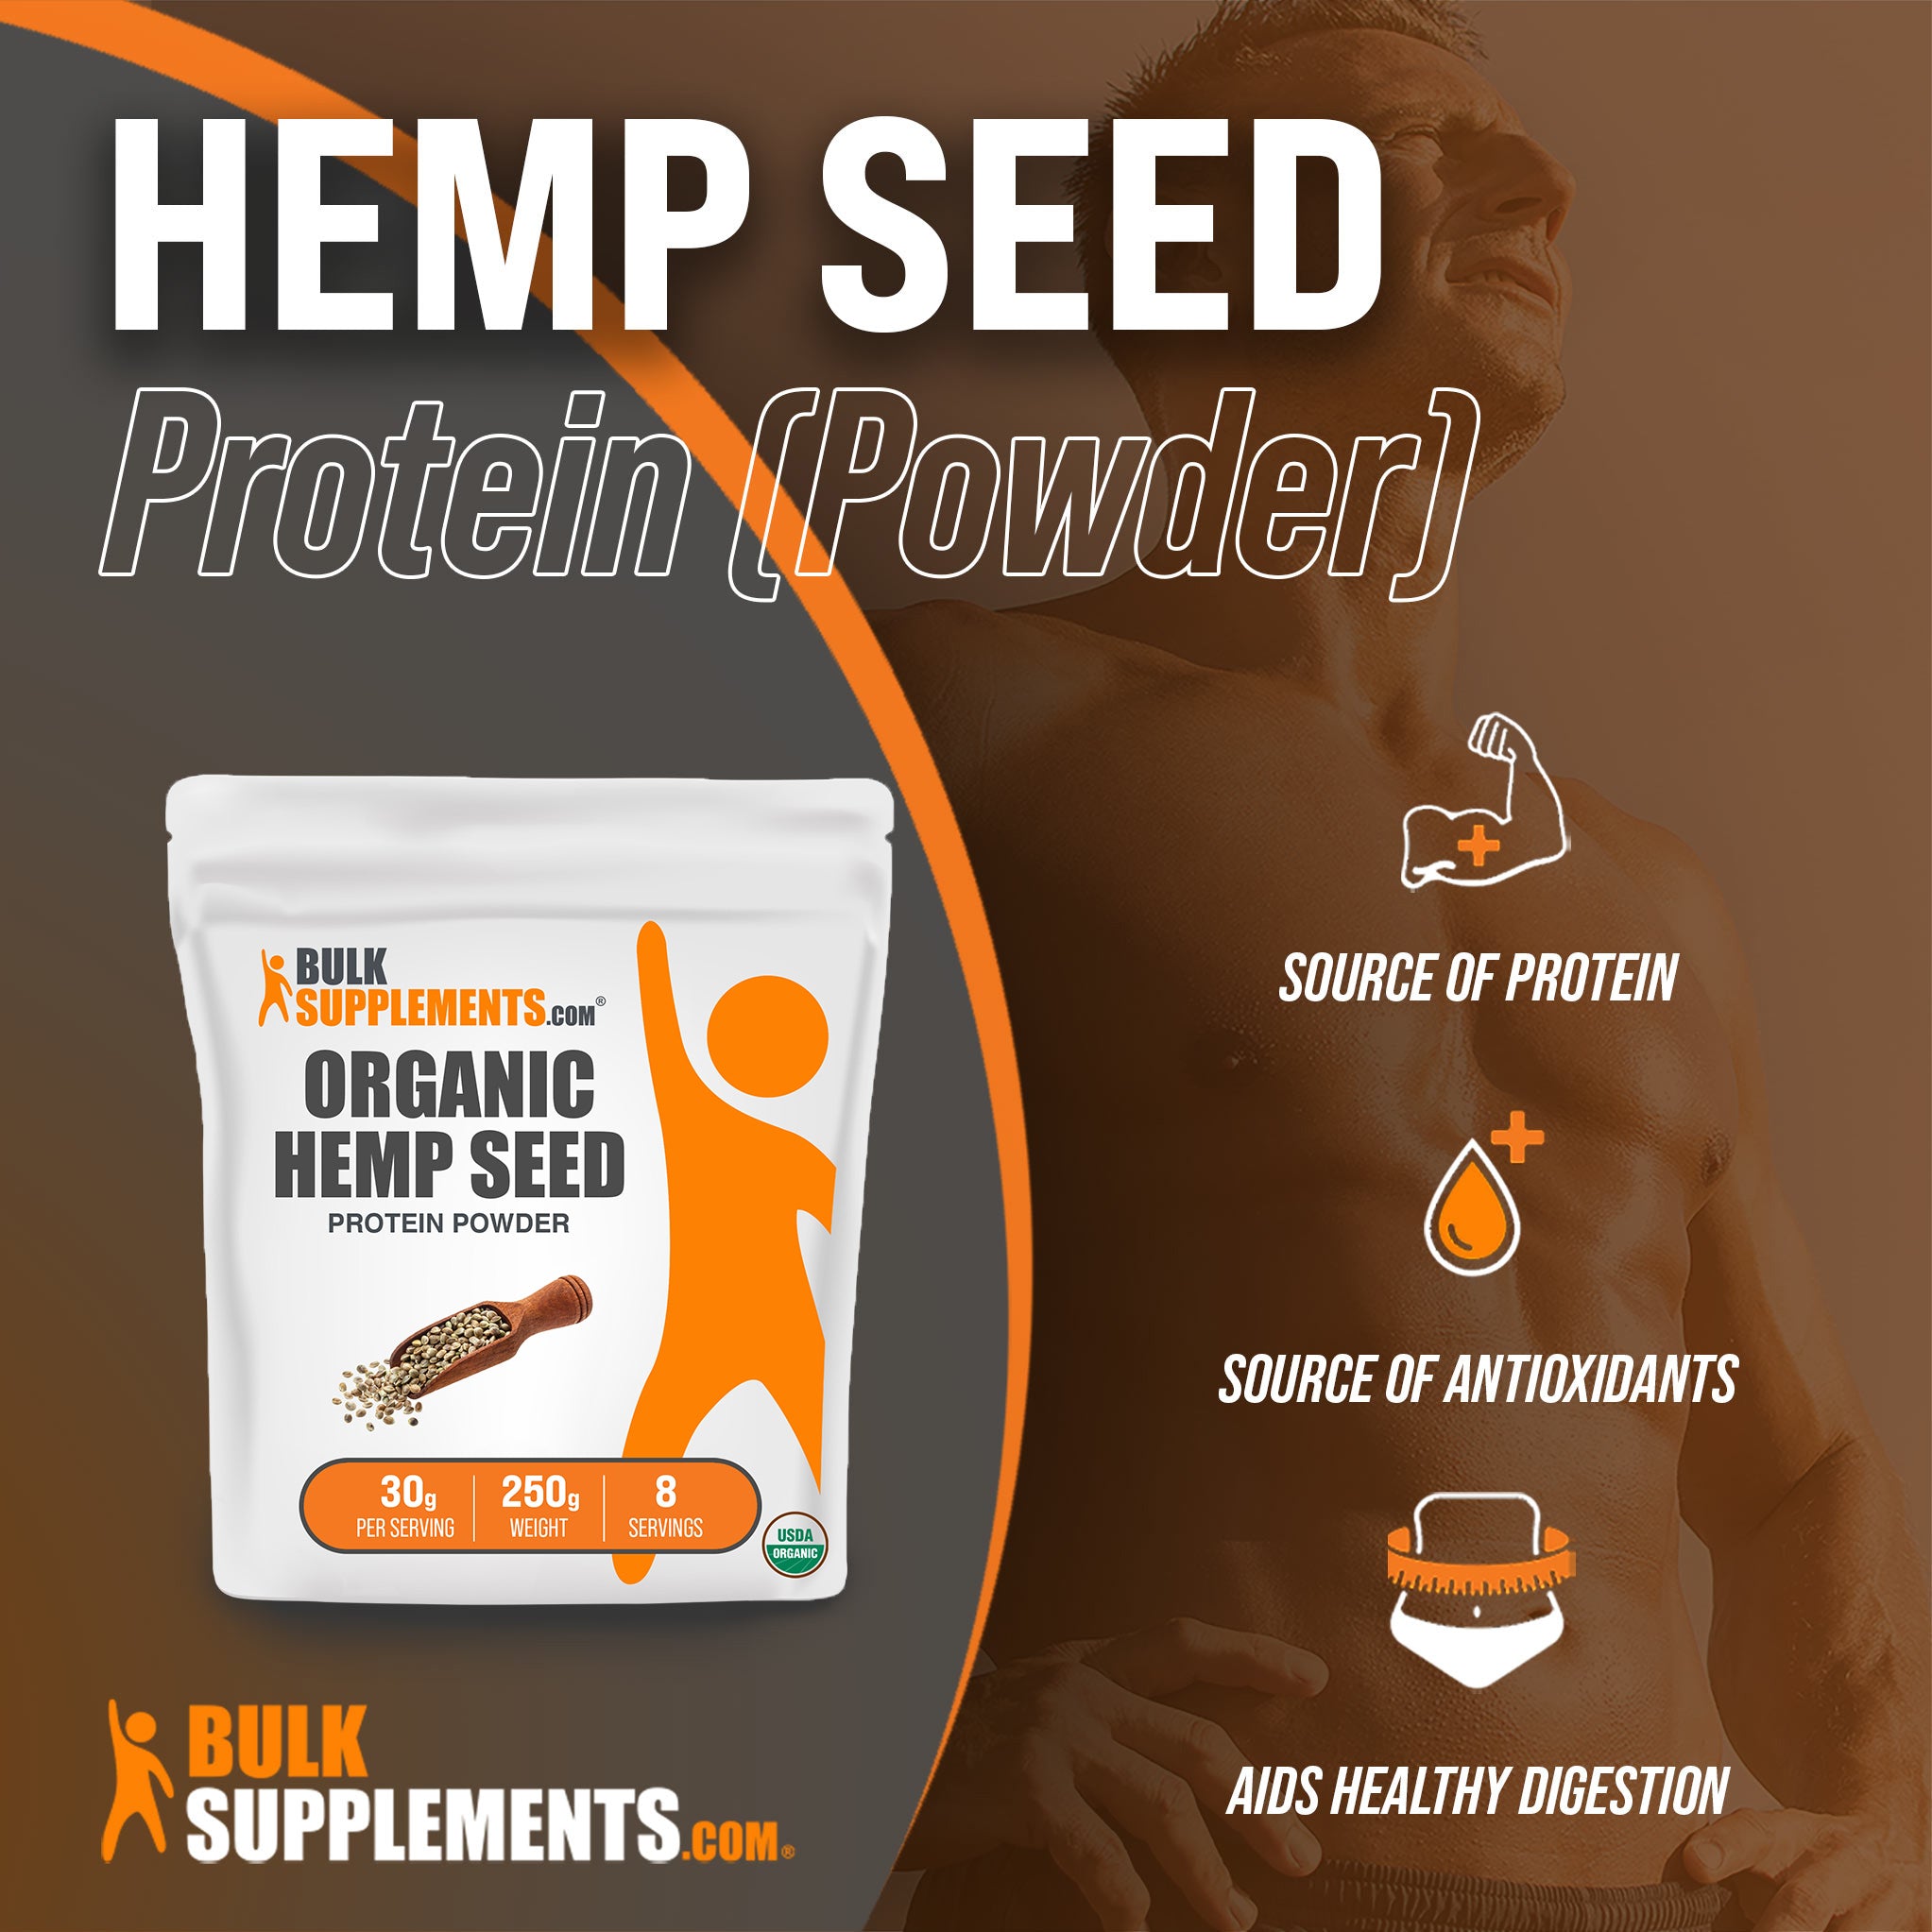 Benefits of Organic Hemp Seed Protein Powder: source of protein, source of antioxidants, aids healthy digestion